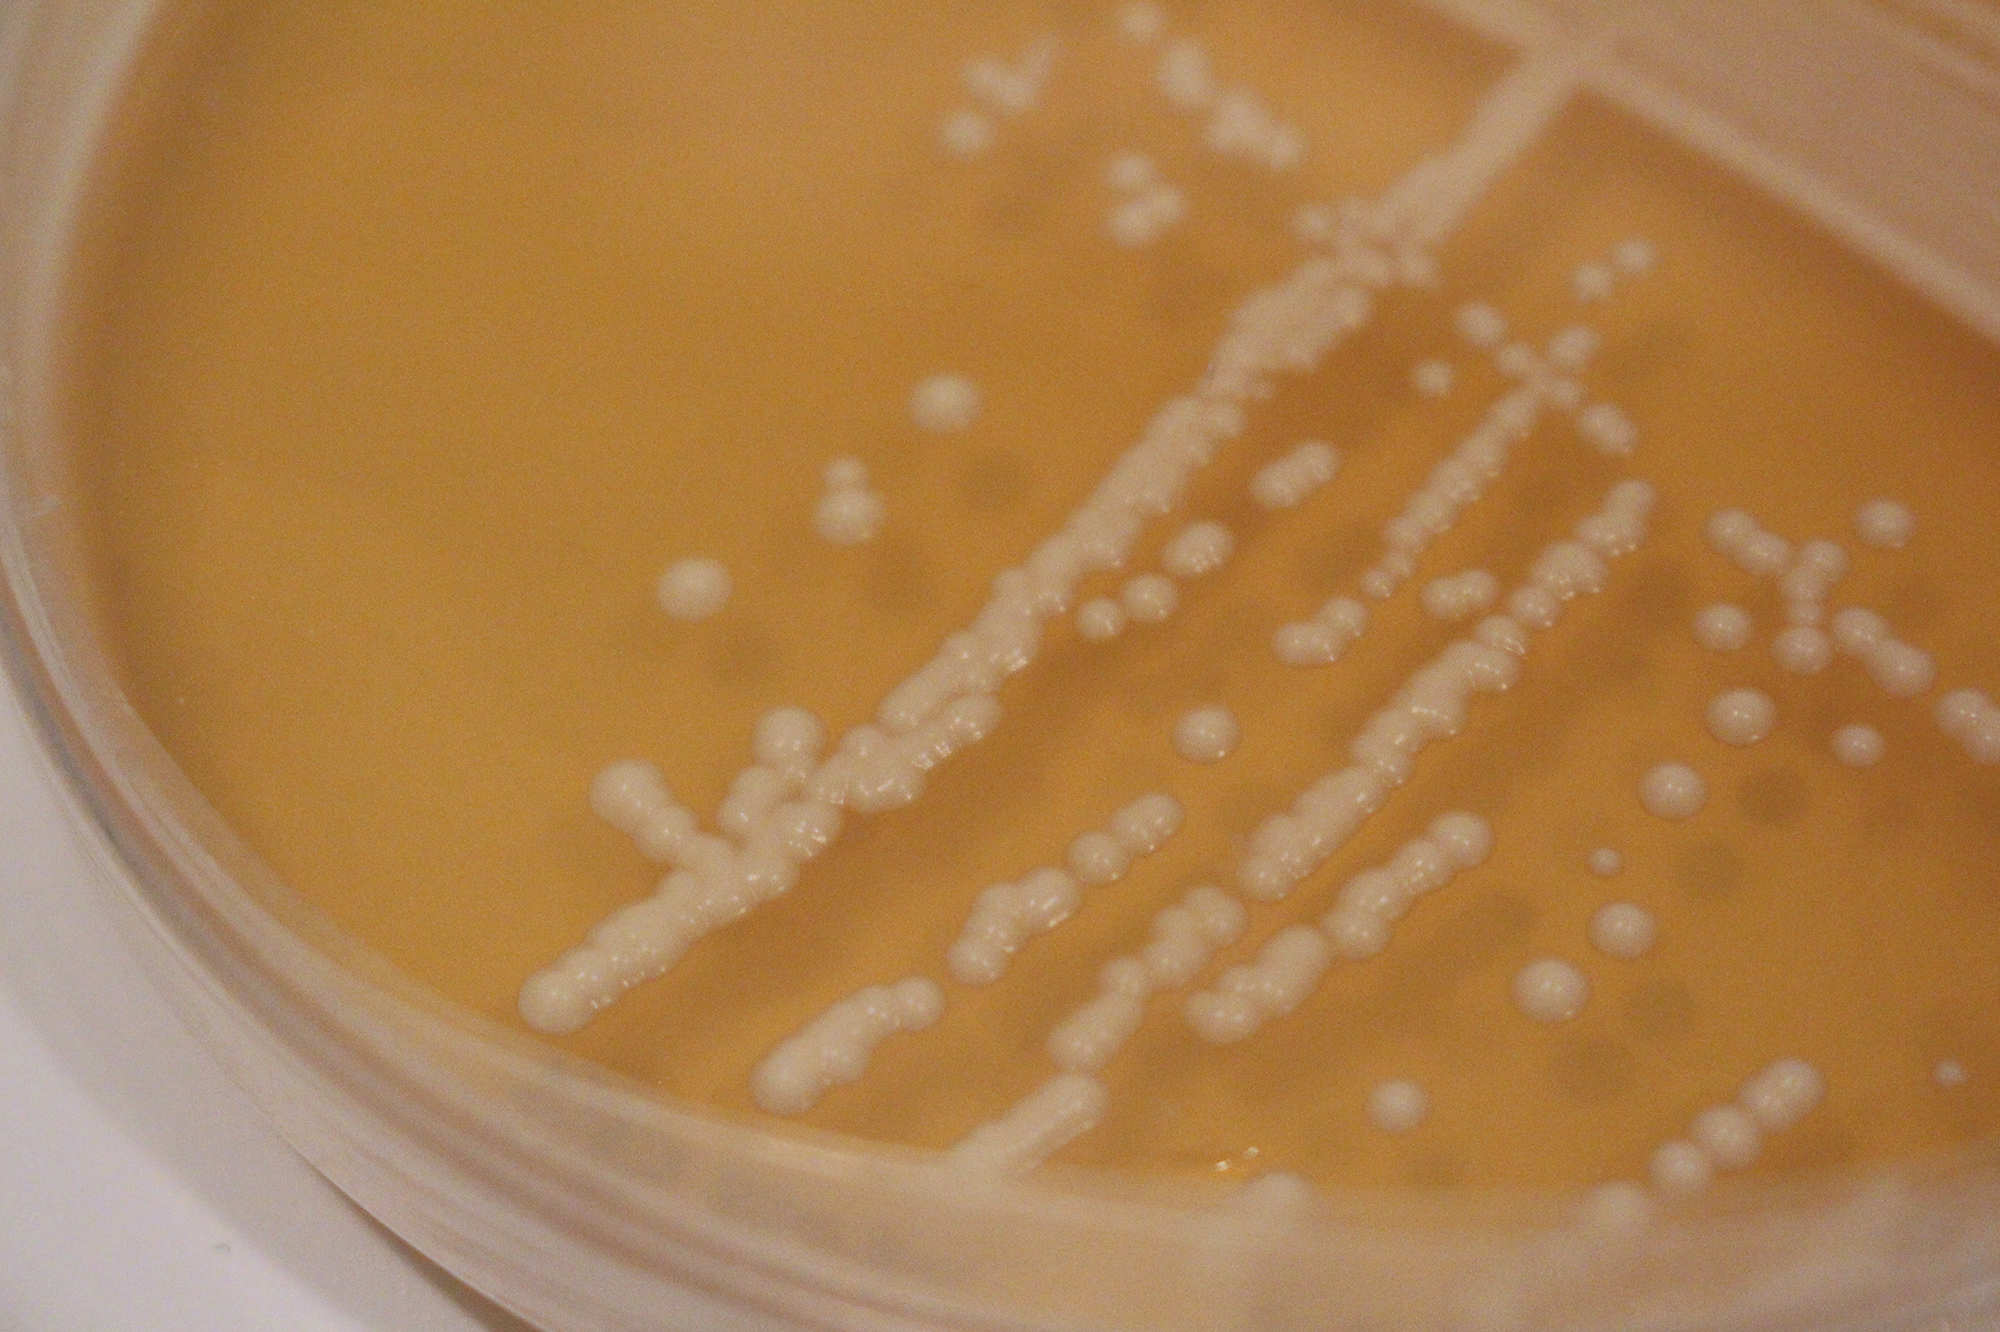 Colonies of yeast that are capable of making sour beer grow in a Petri dish.